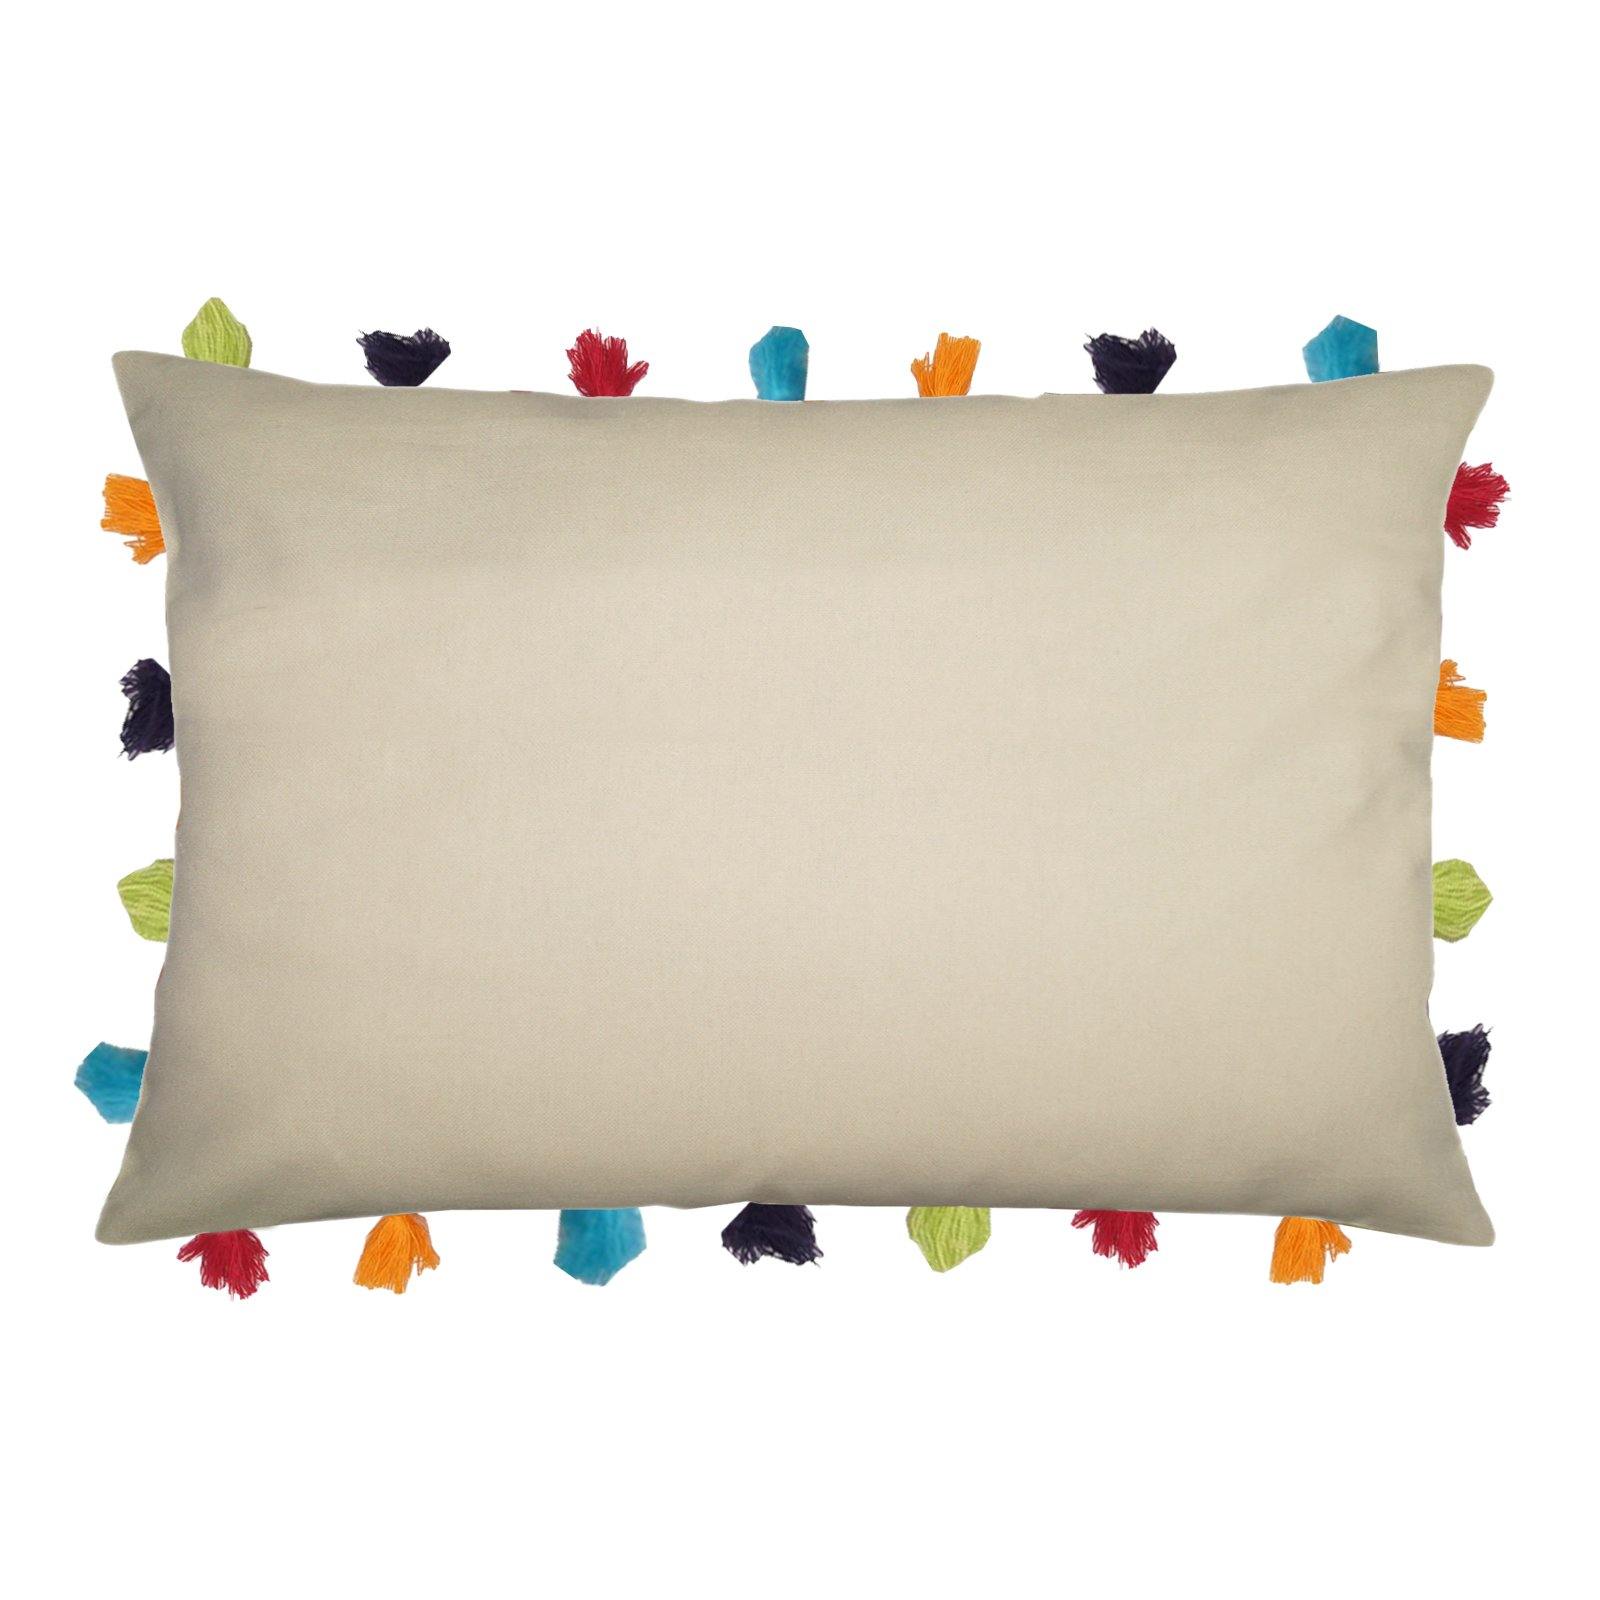 Lushomes Ecru Cushion Cover with Colorful tassels (Single pc, 14 x 20”) - Lushomes